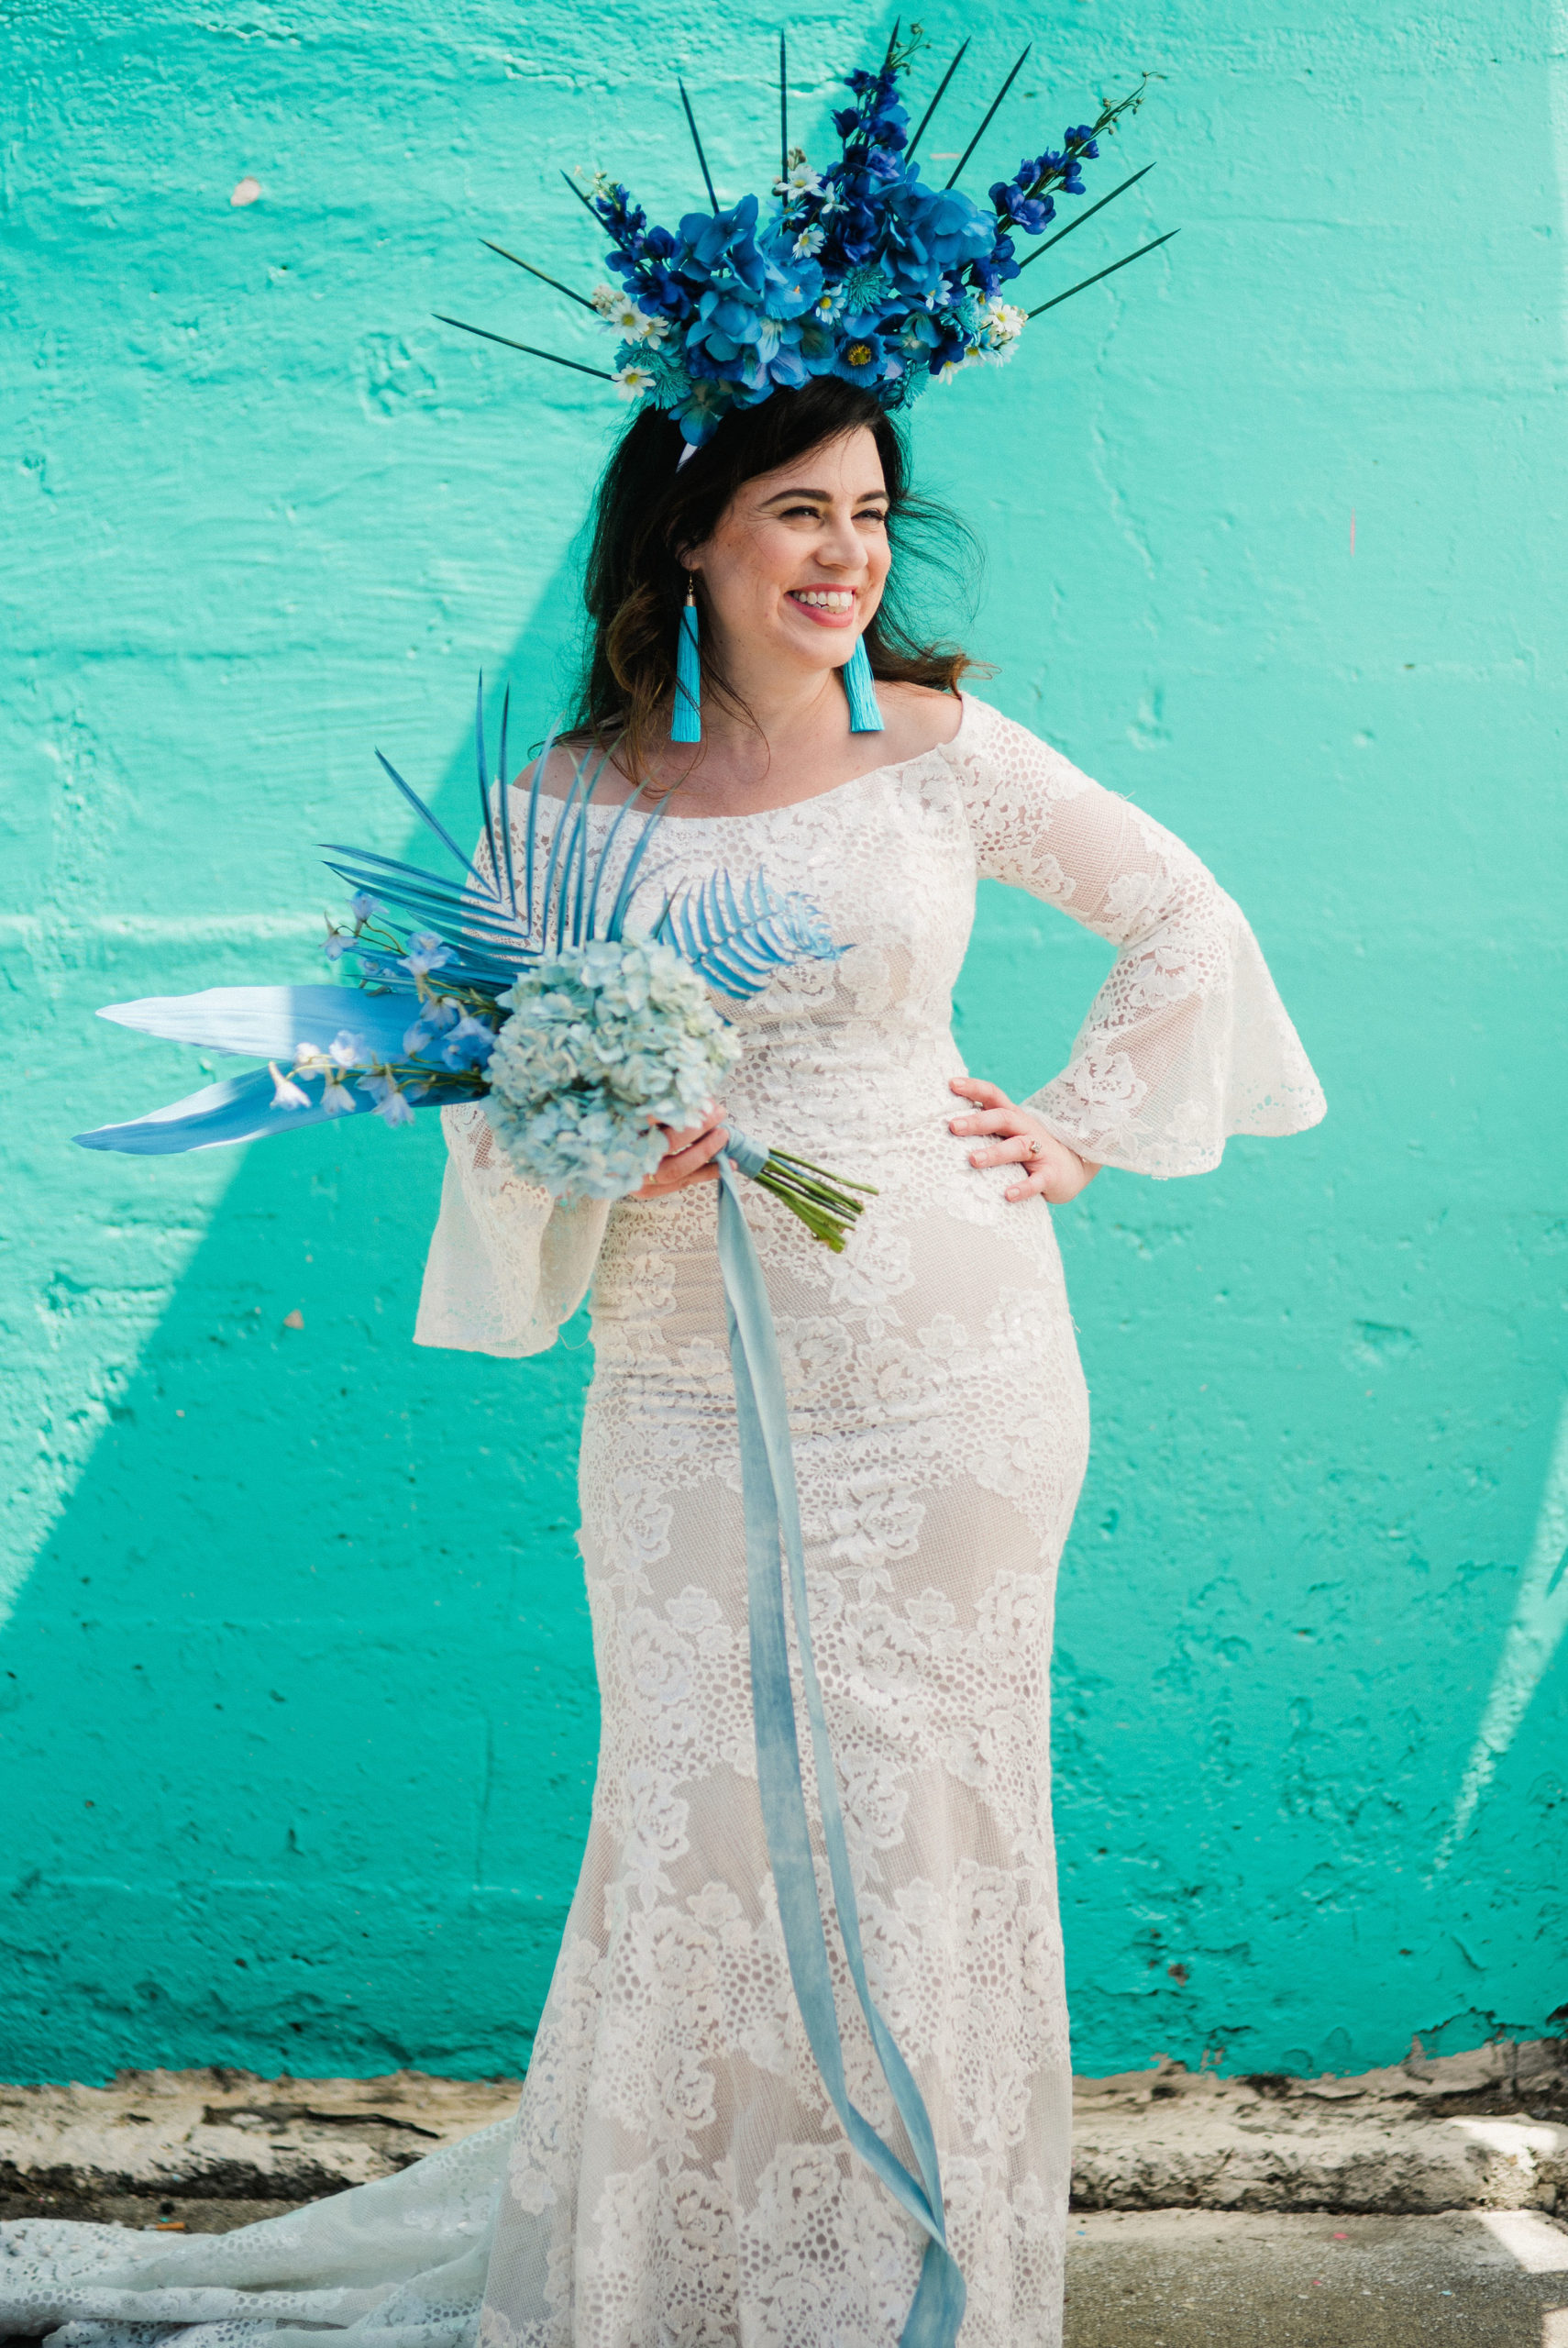 woman wearing wedding dress with blue accessories